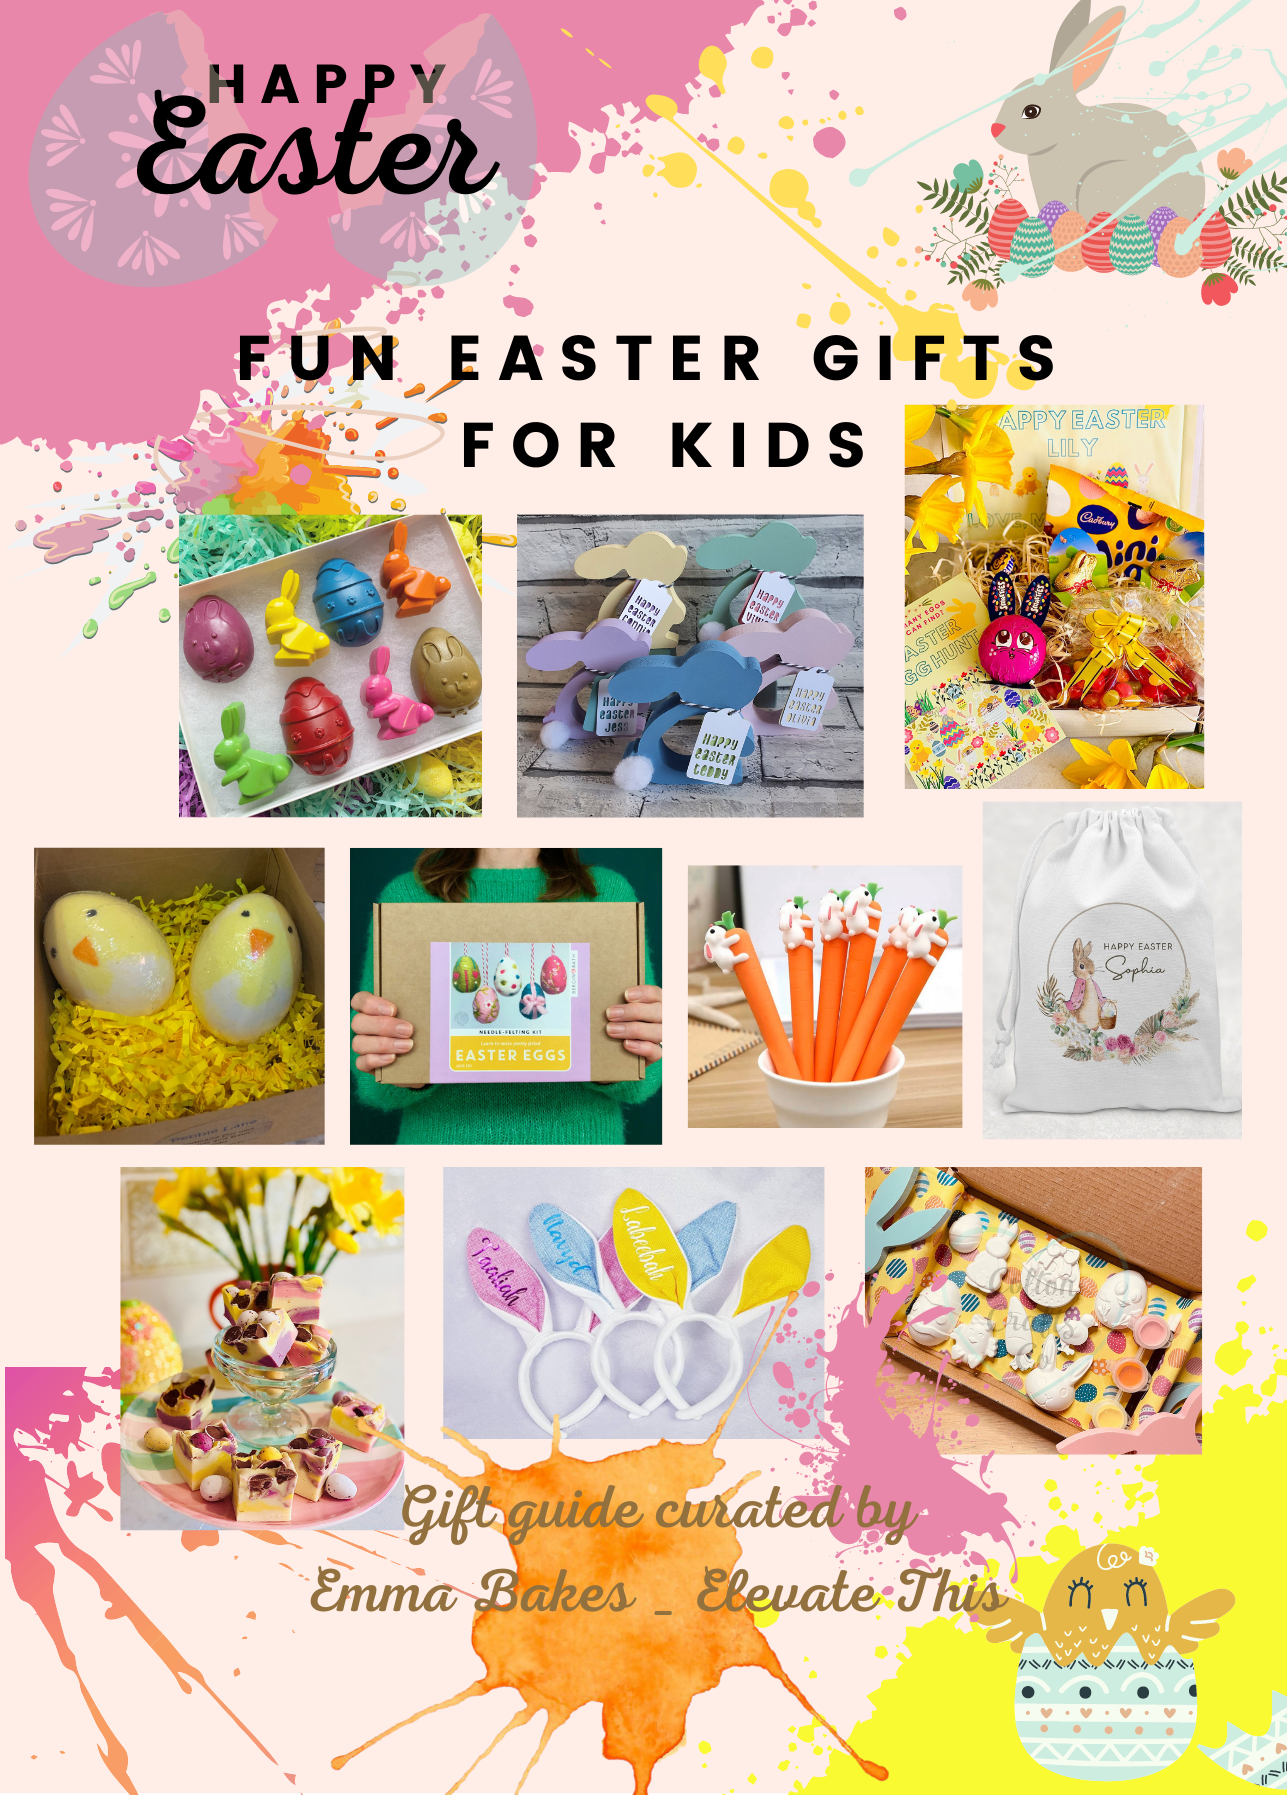 Fun Easter gifts for kids – Easter gift guide